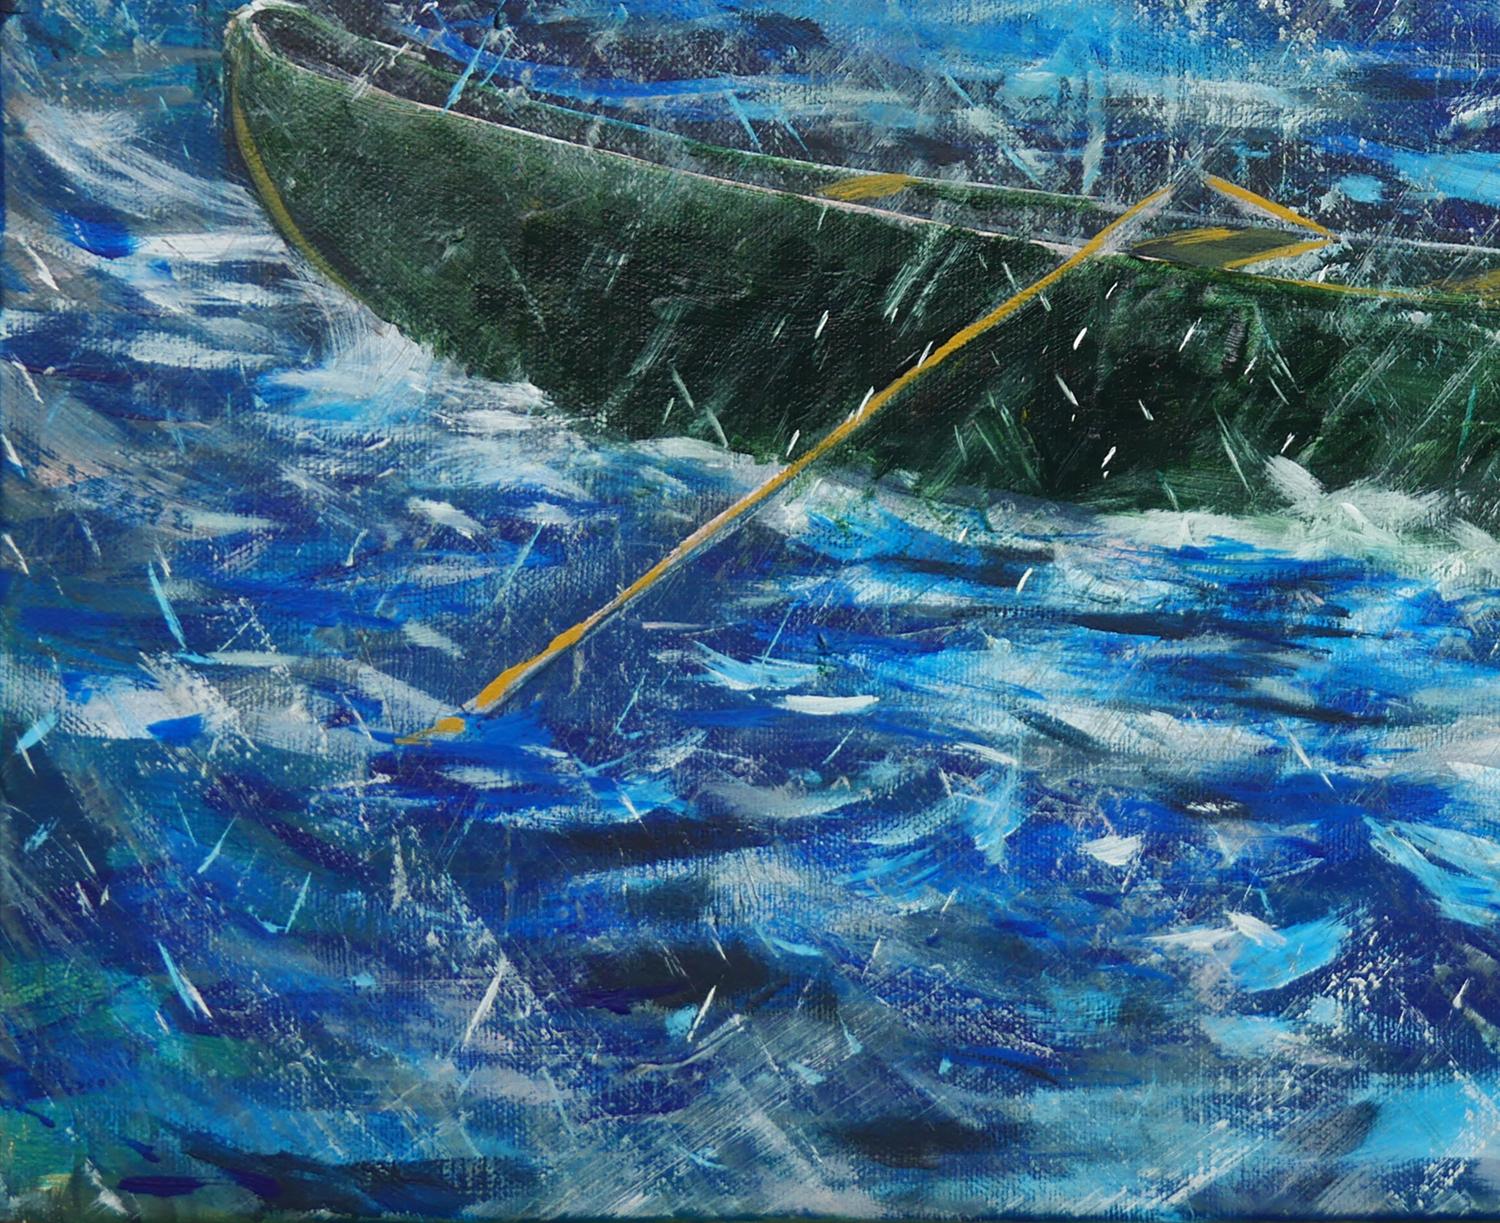 Dark blue seascape landscape by Houston, TX artist Moisés Villafuerte. The painting depicts a stormy sea with a green small wooden boat with a red flag. The piece is signed by the artist at the back. Unframed but framing options are